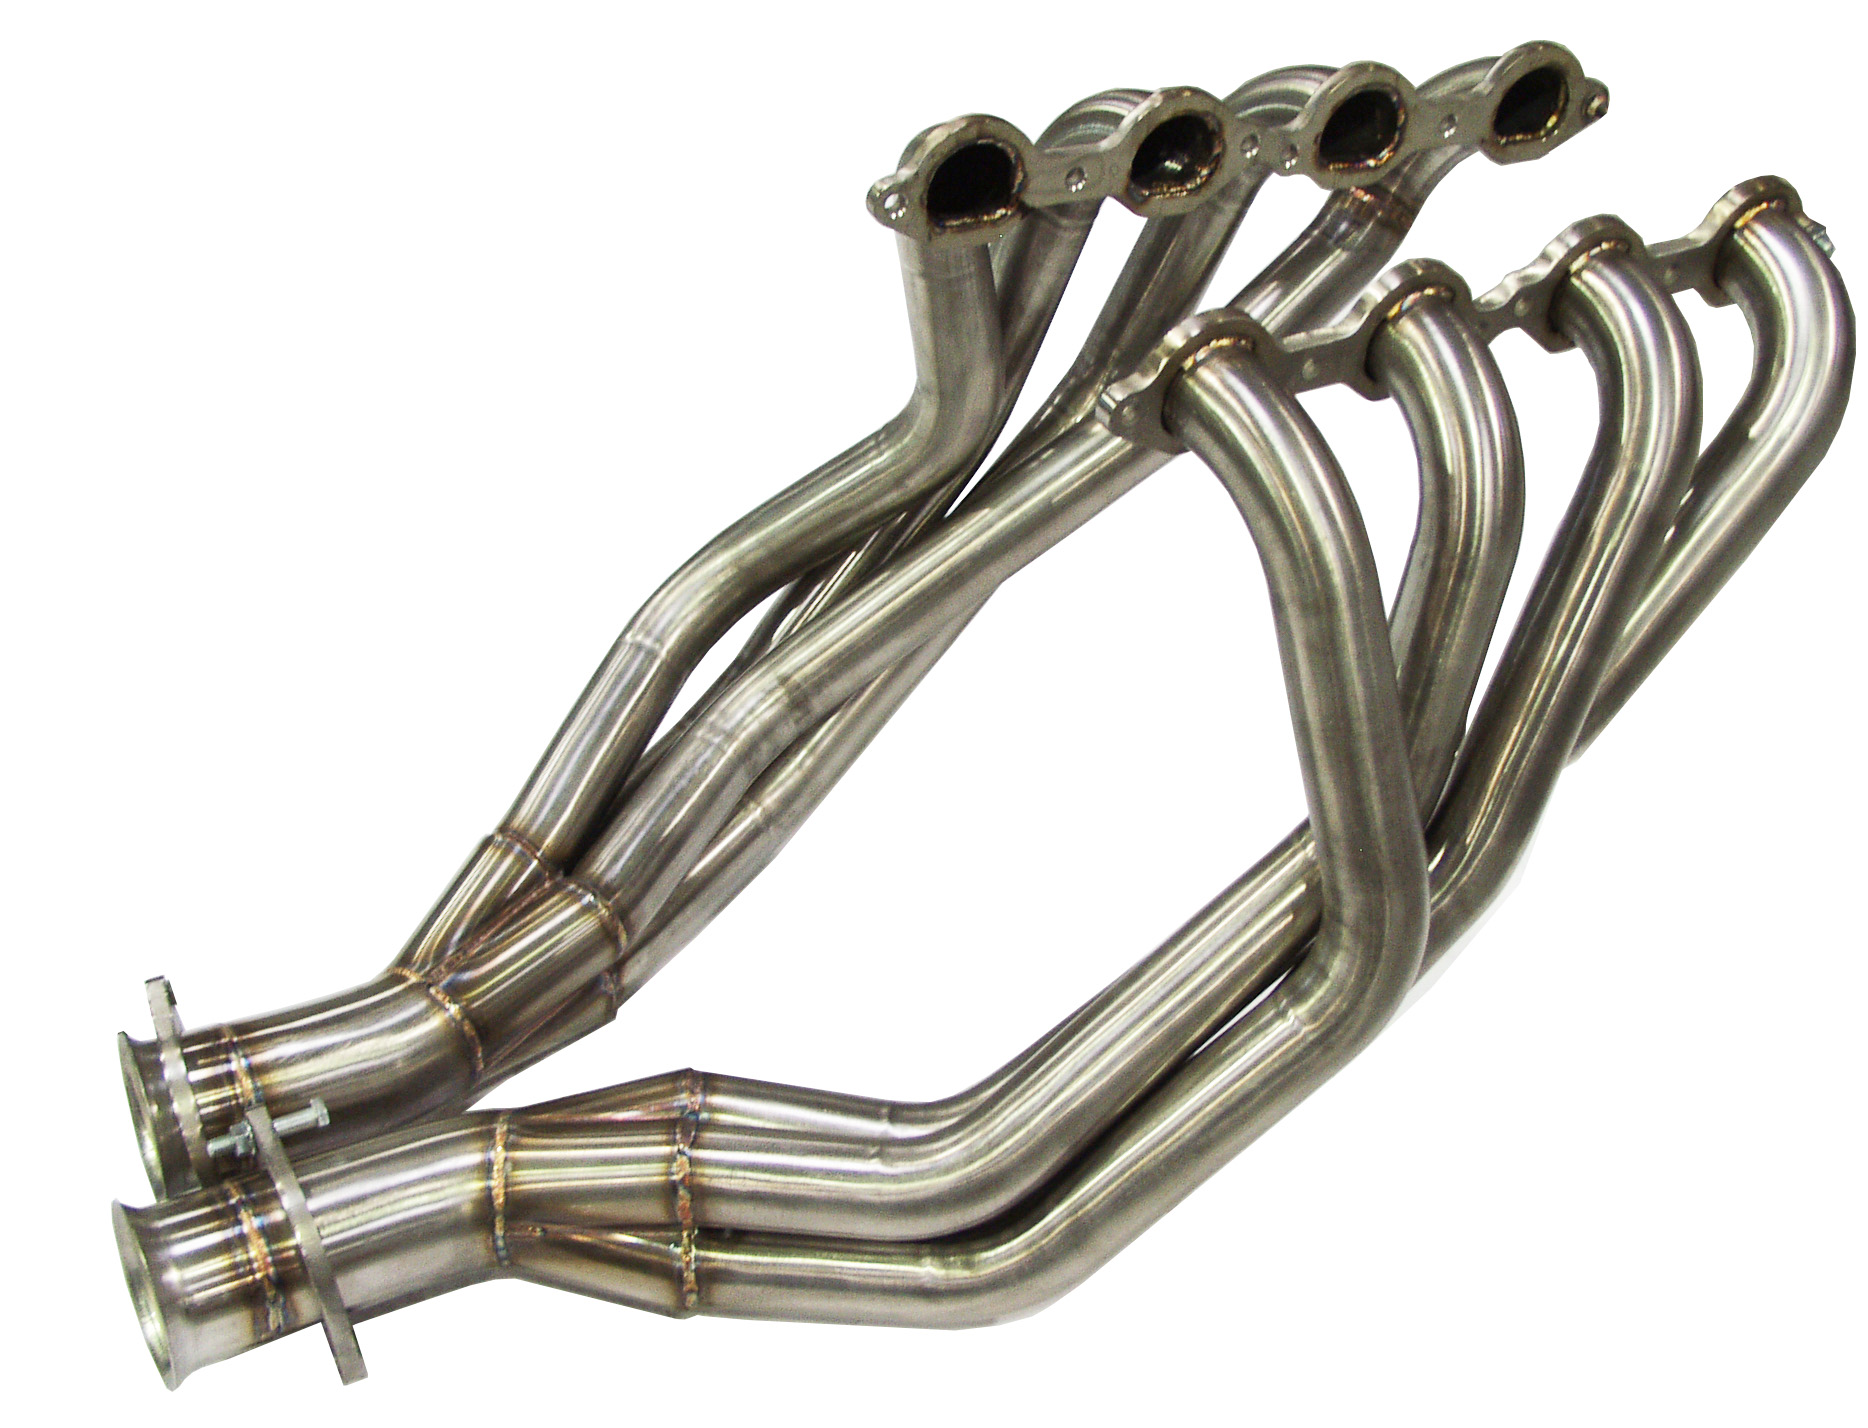 B&B C7 Corvette Stingray LT1 4 into 1 Style Long Tube Exhaust Headers, 1 7/8 tube with 3" collector